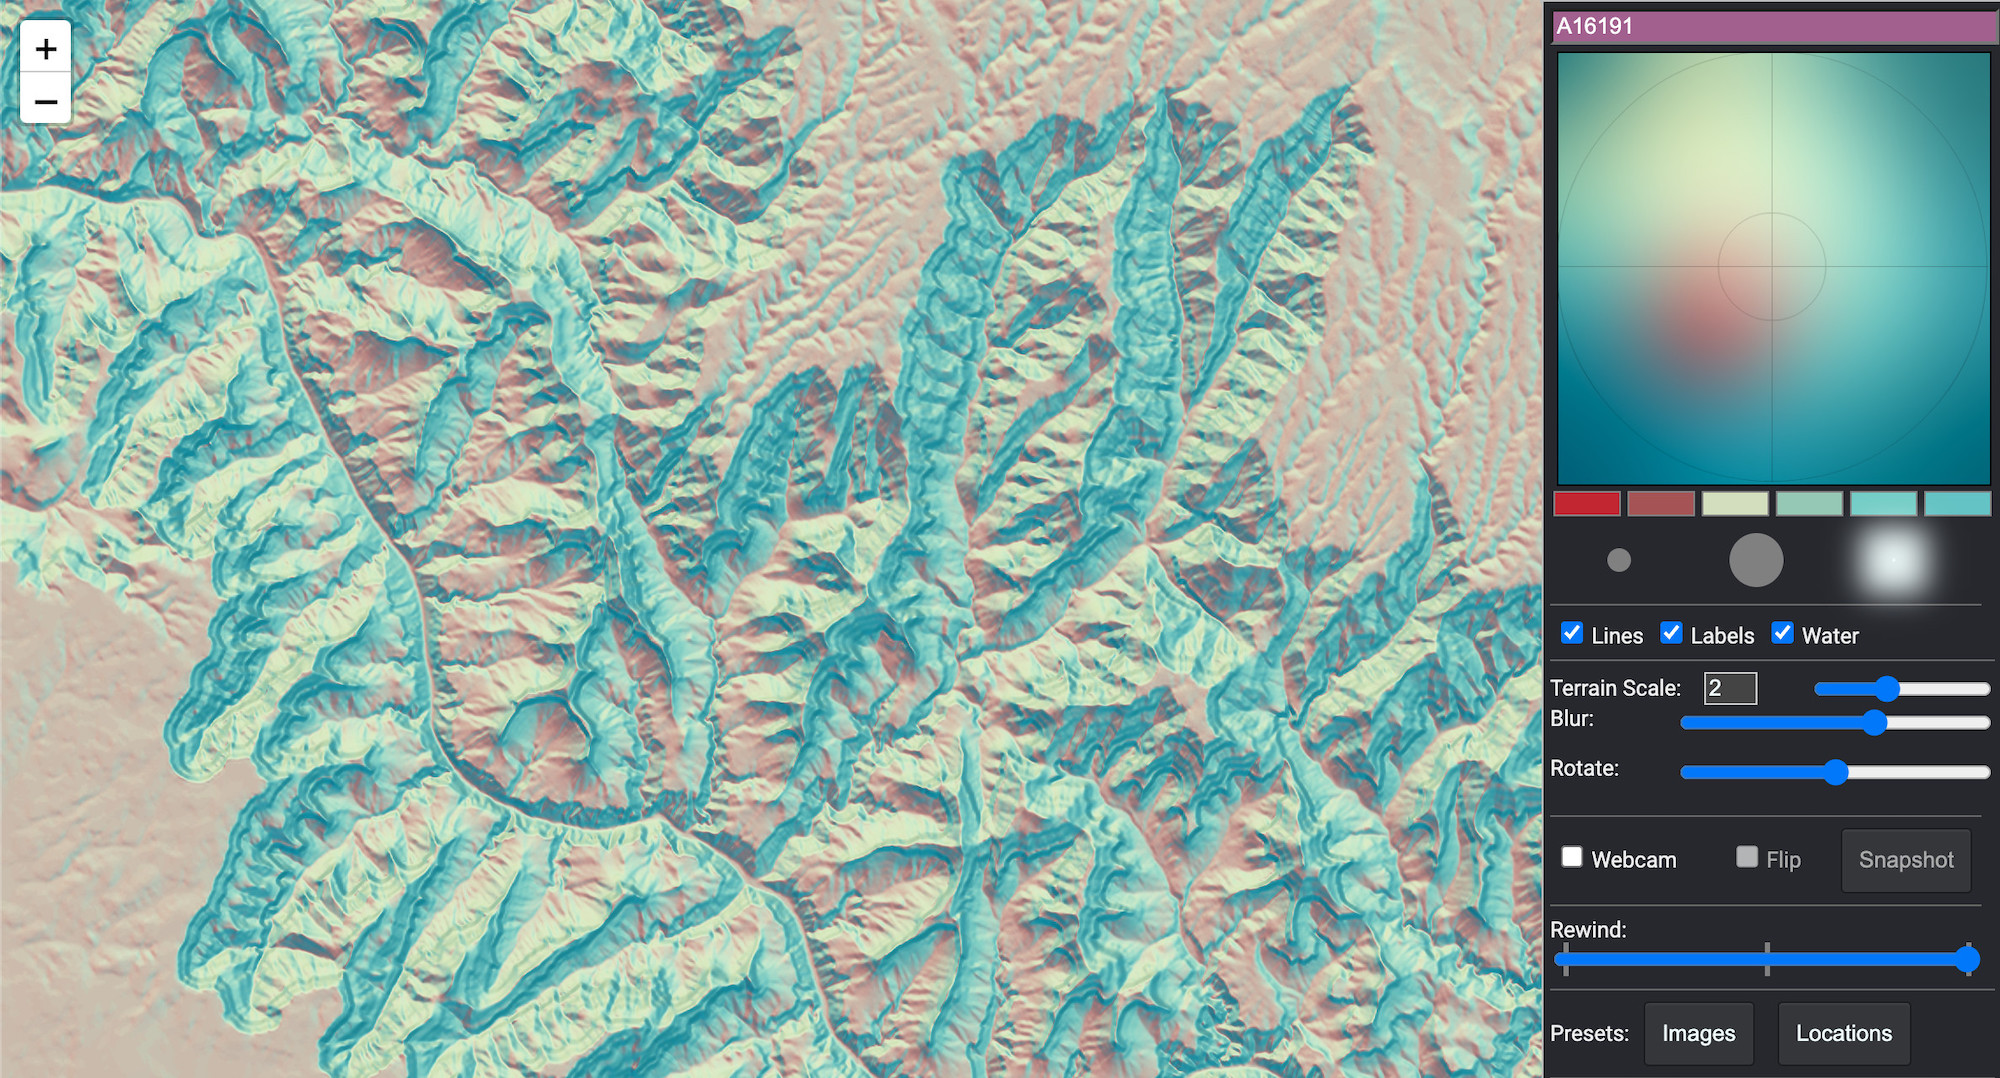 A terrain map of the Grand Canyon in teal and orange